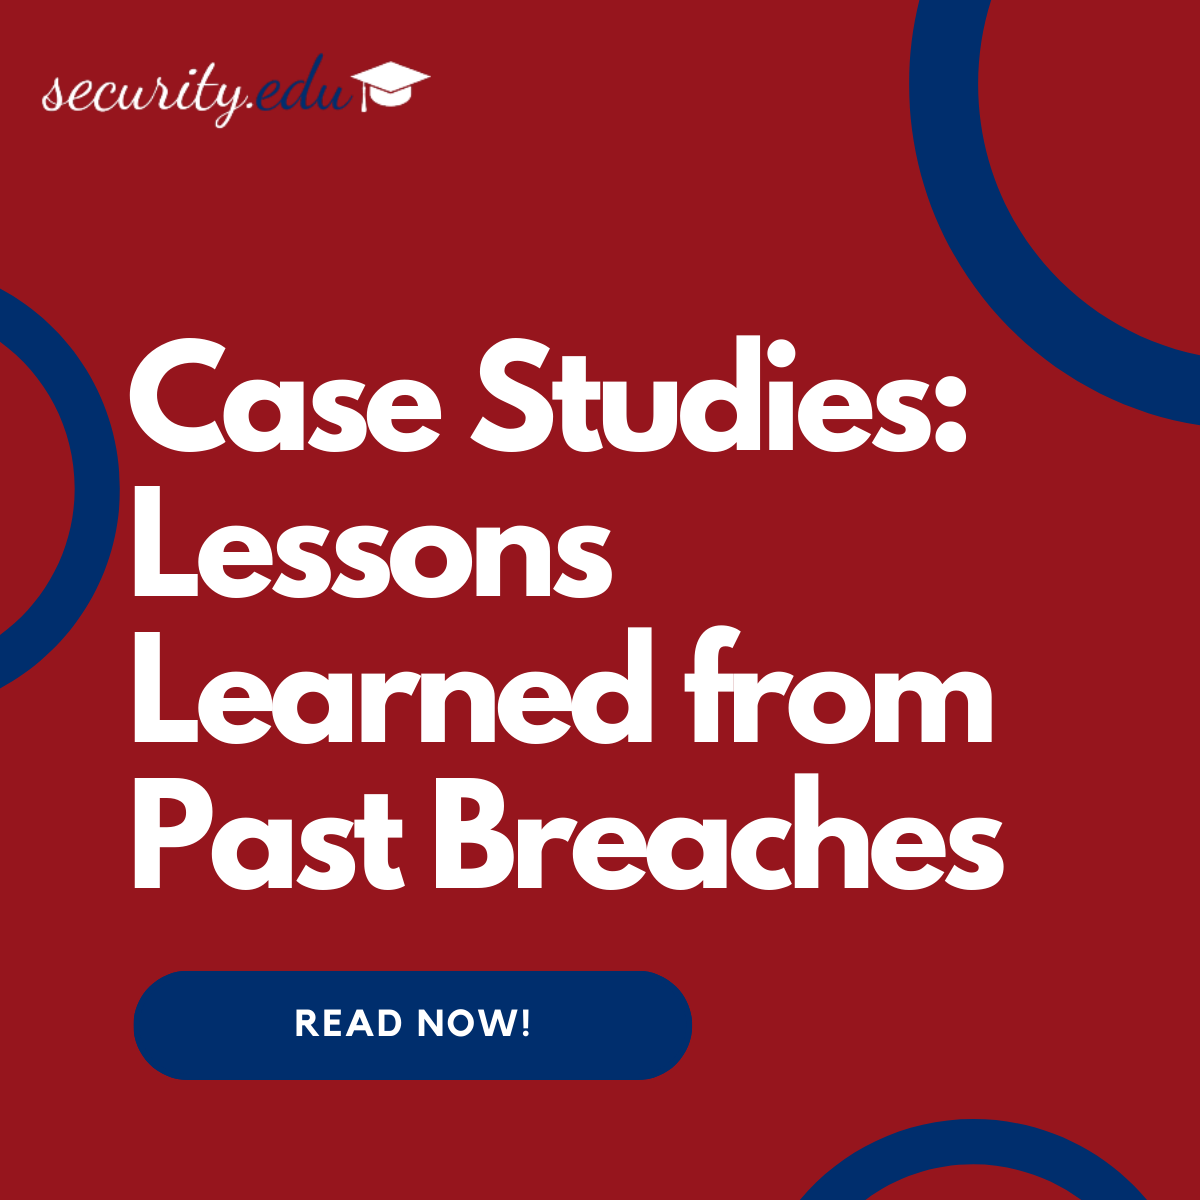 Case Studies: Lessons Learned by Schools in Security Breaches